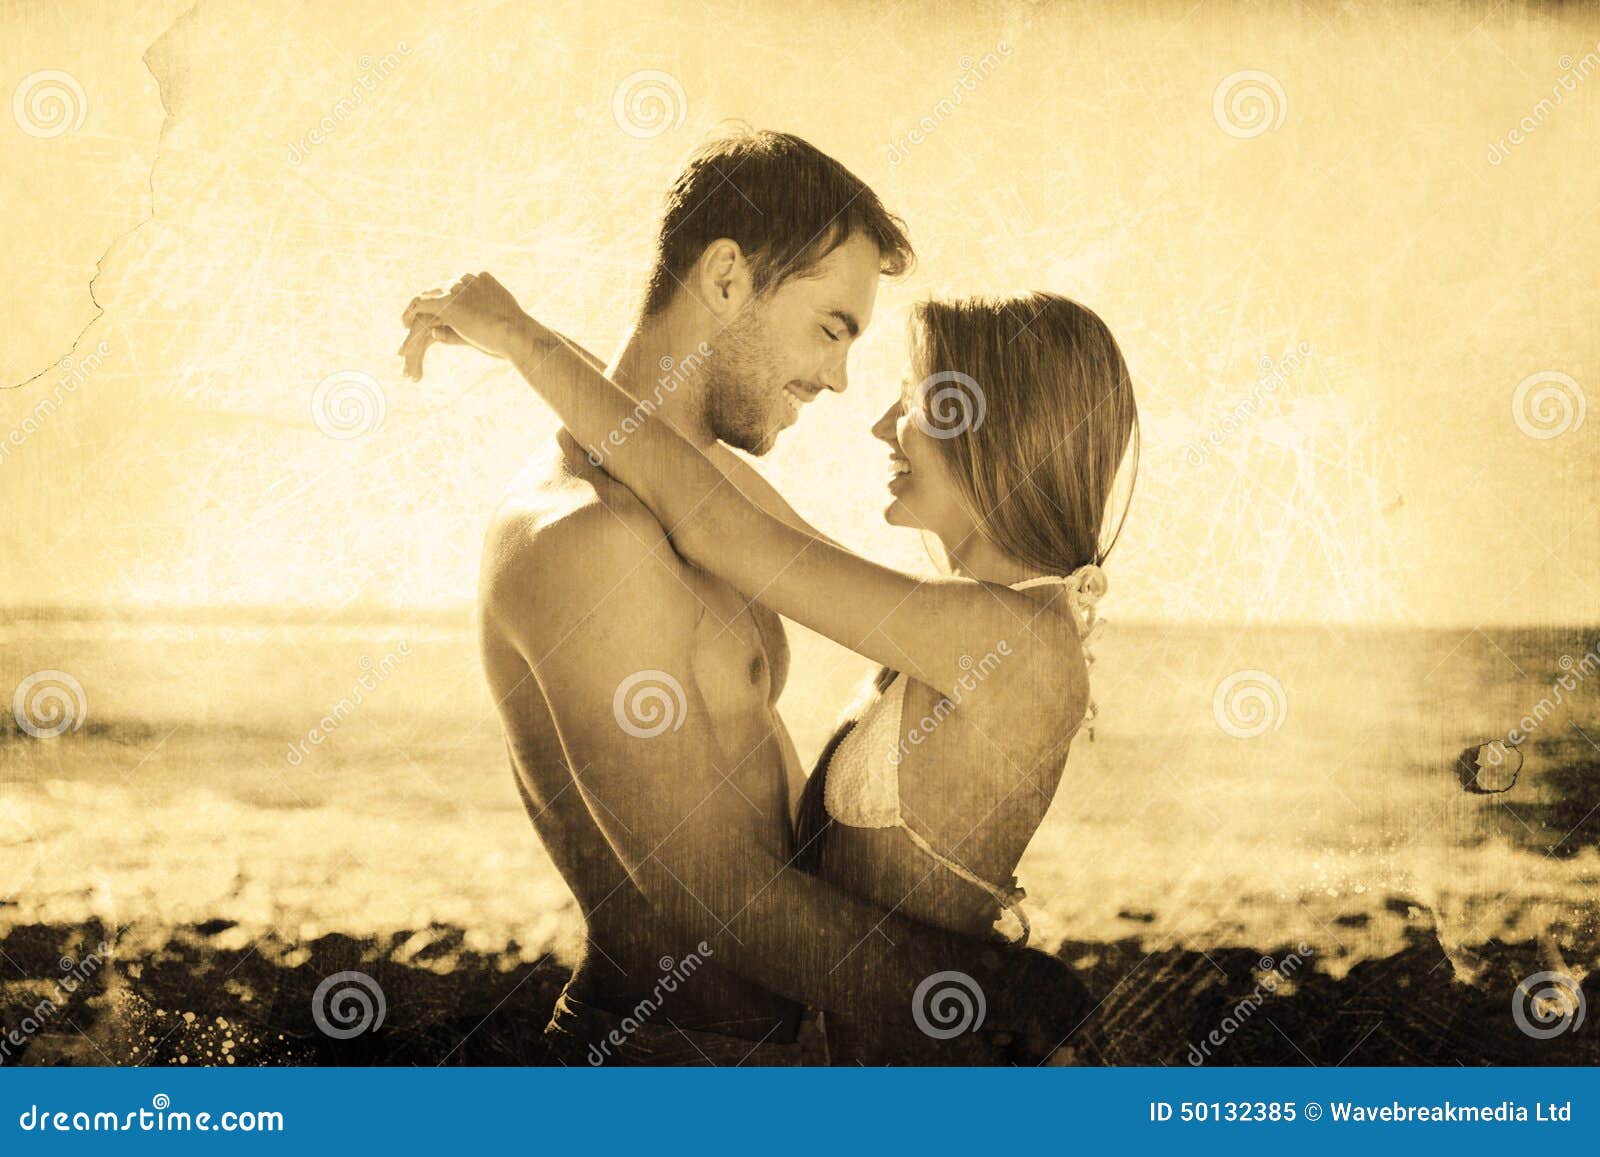 https://thumbs.dreamstime.com/z/composite-image-sexy-couple-embracing-against-grey-background-50132385.jpg